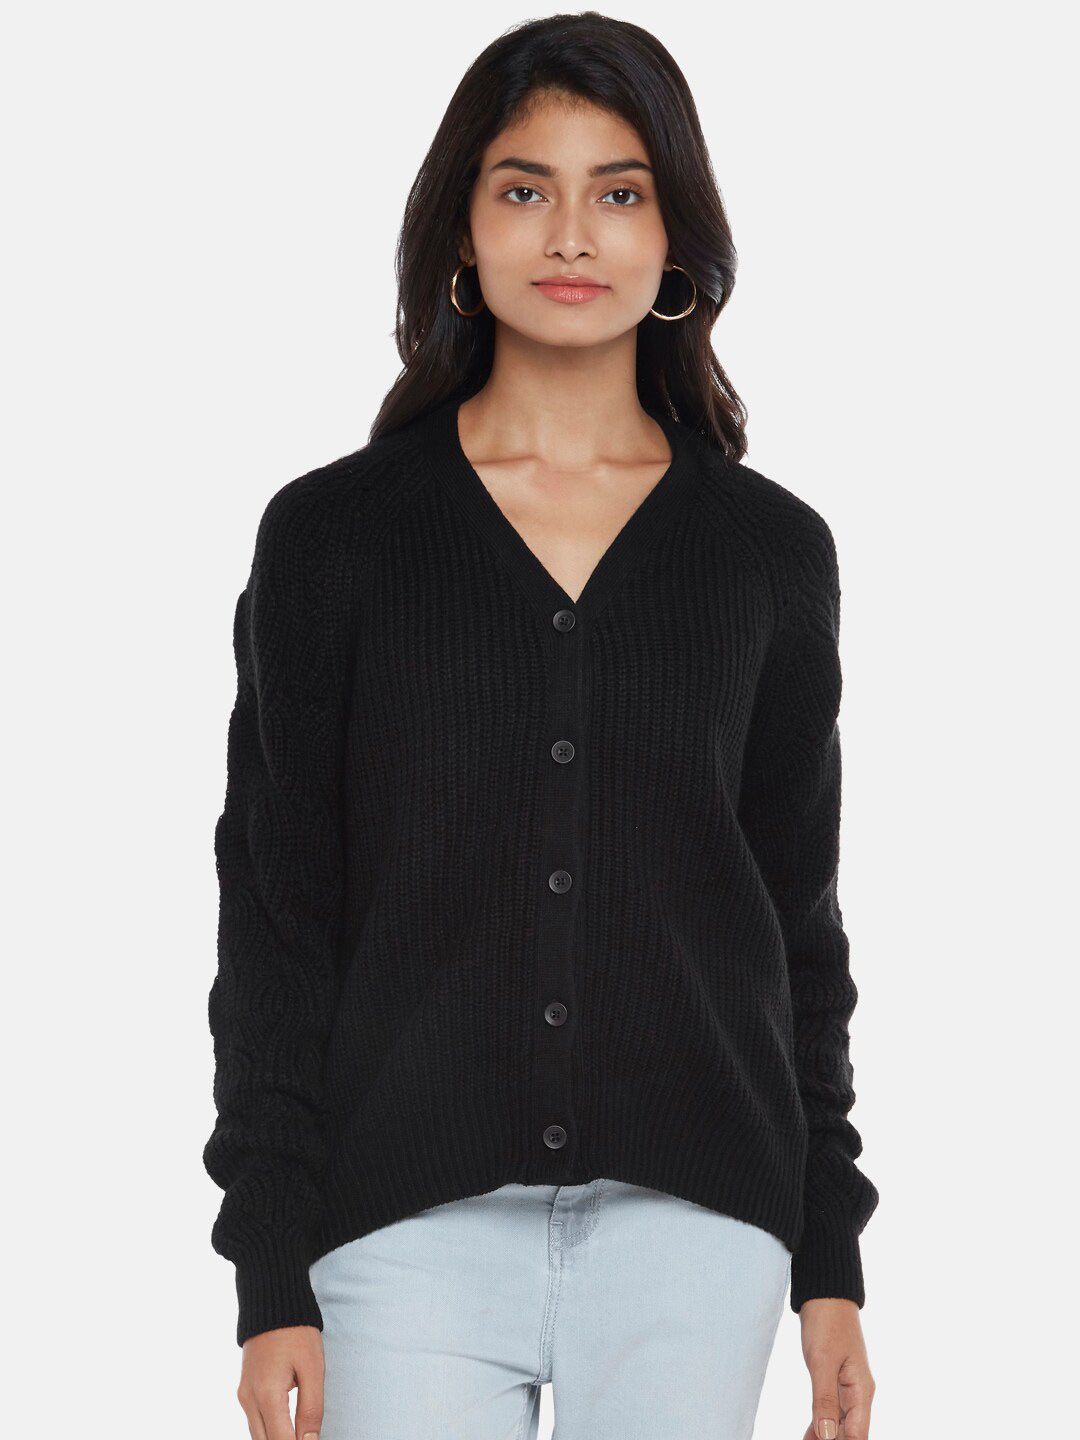 Honey by Pantaloons Women Black Solid Sweater Price in India